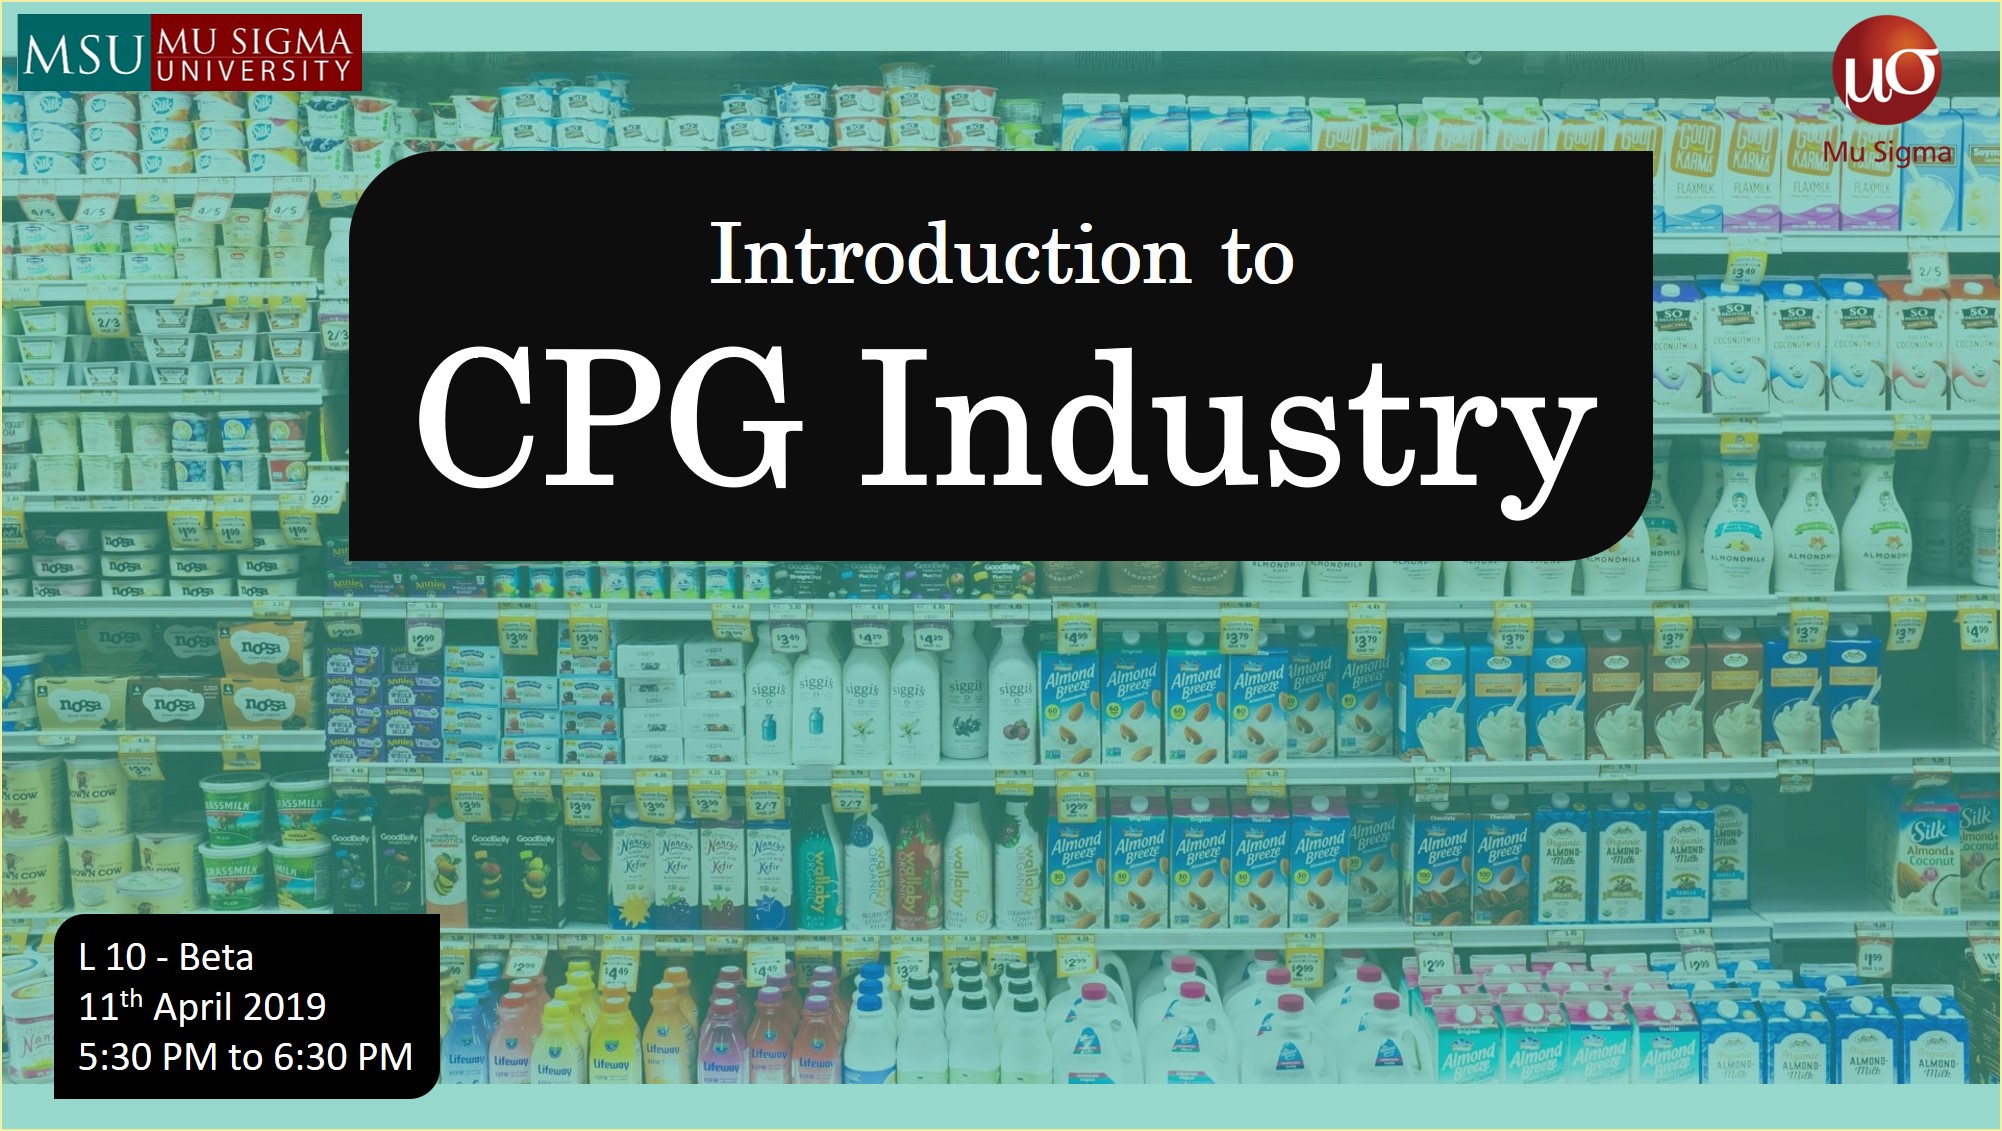 TLH - Introduction to CPG